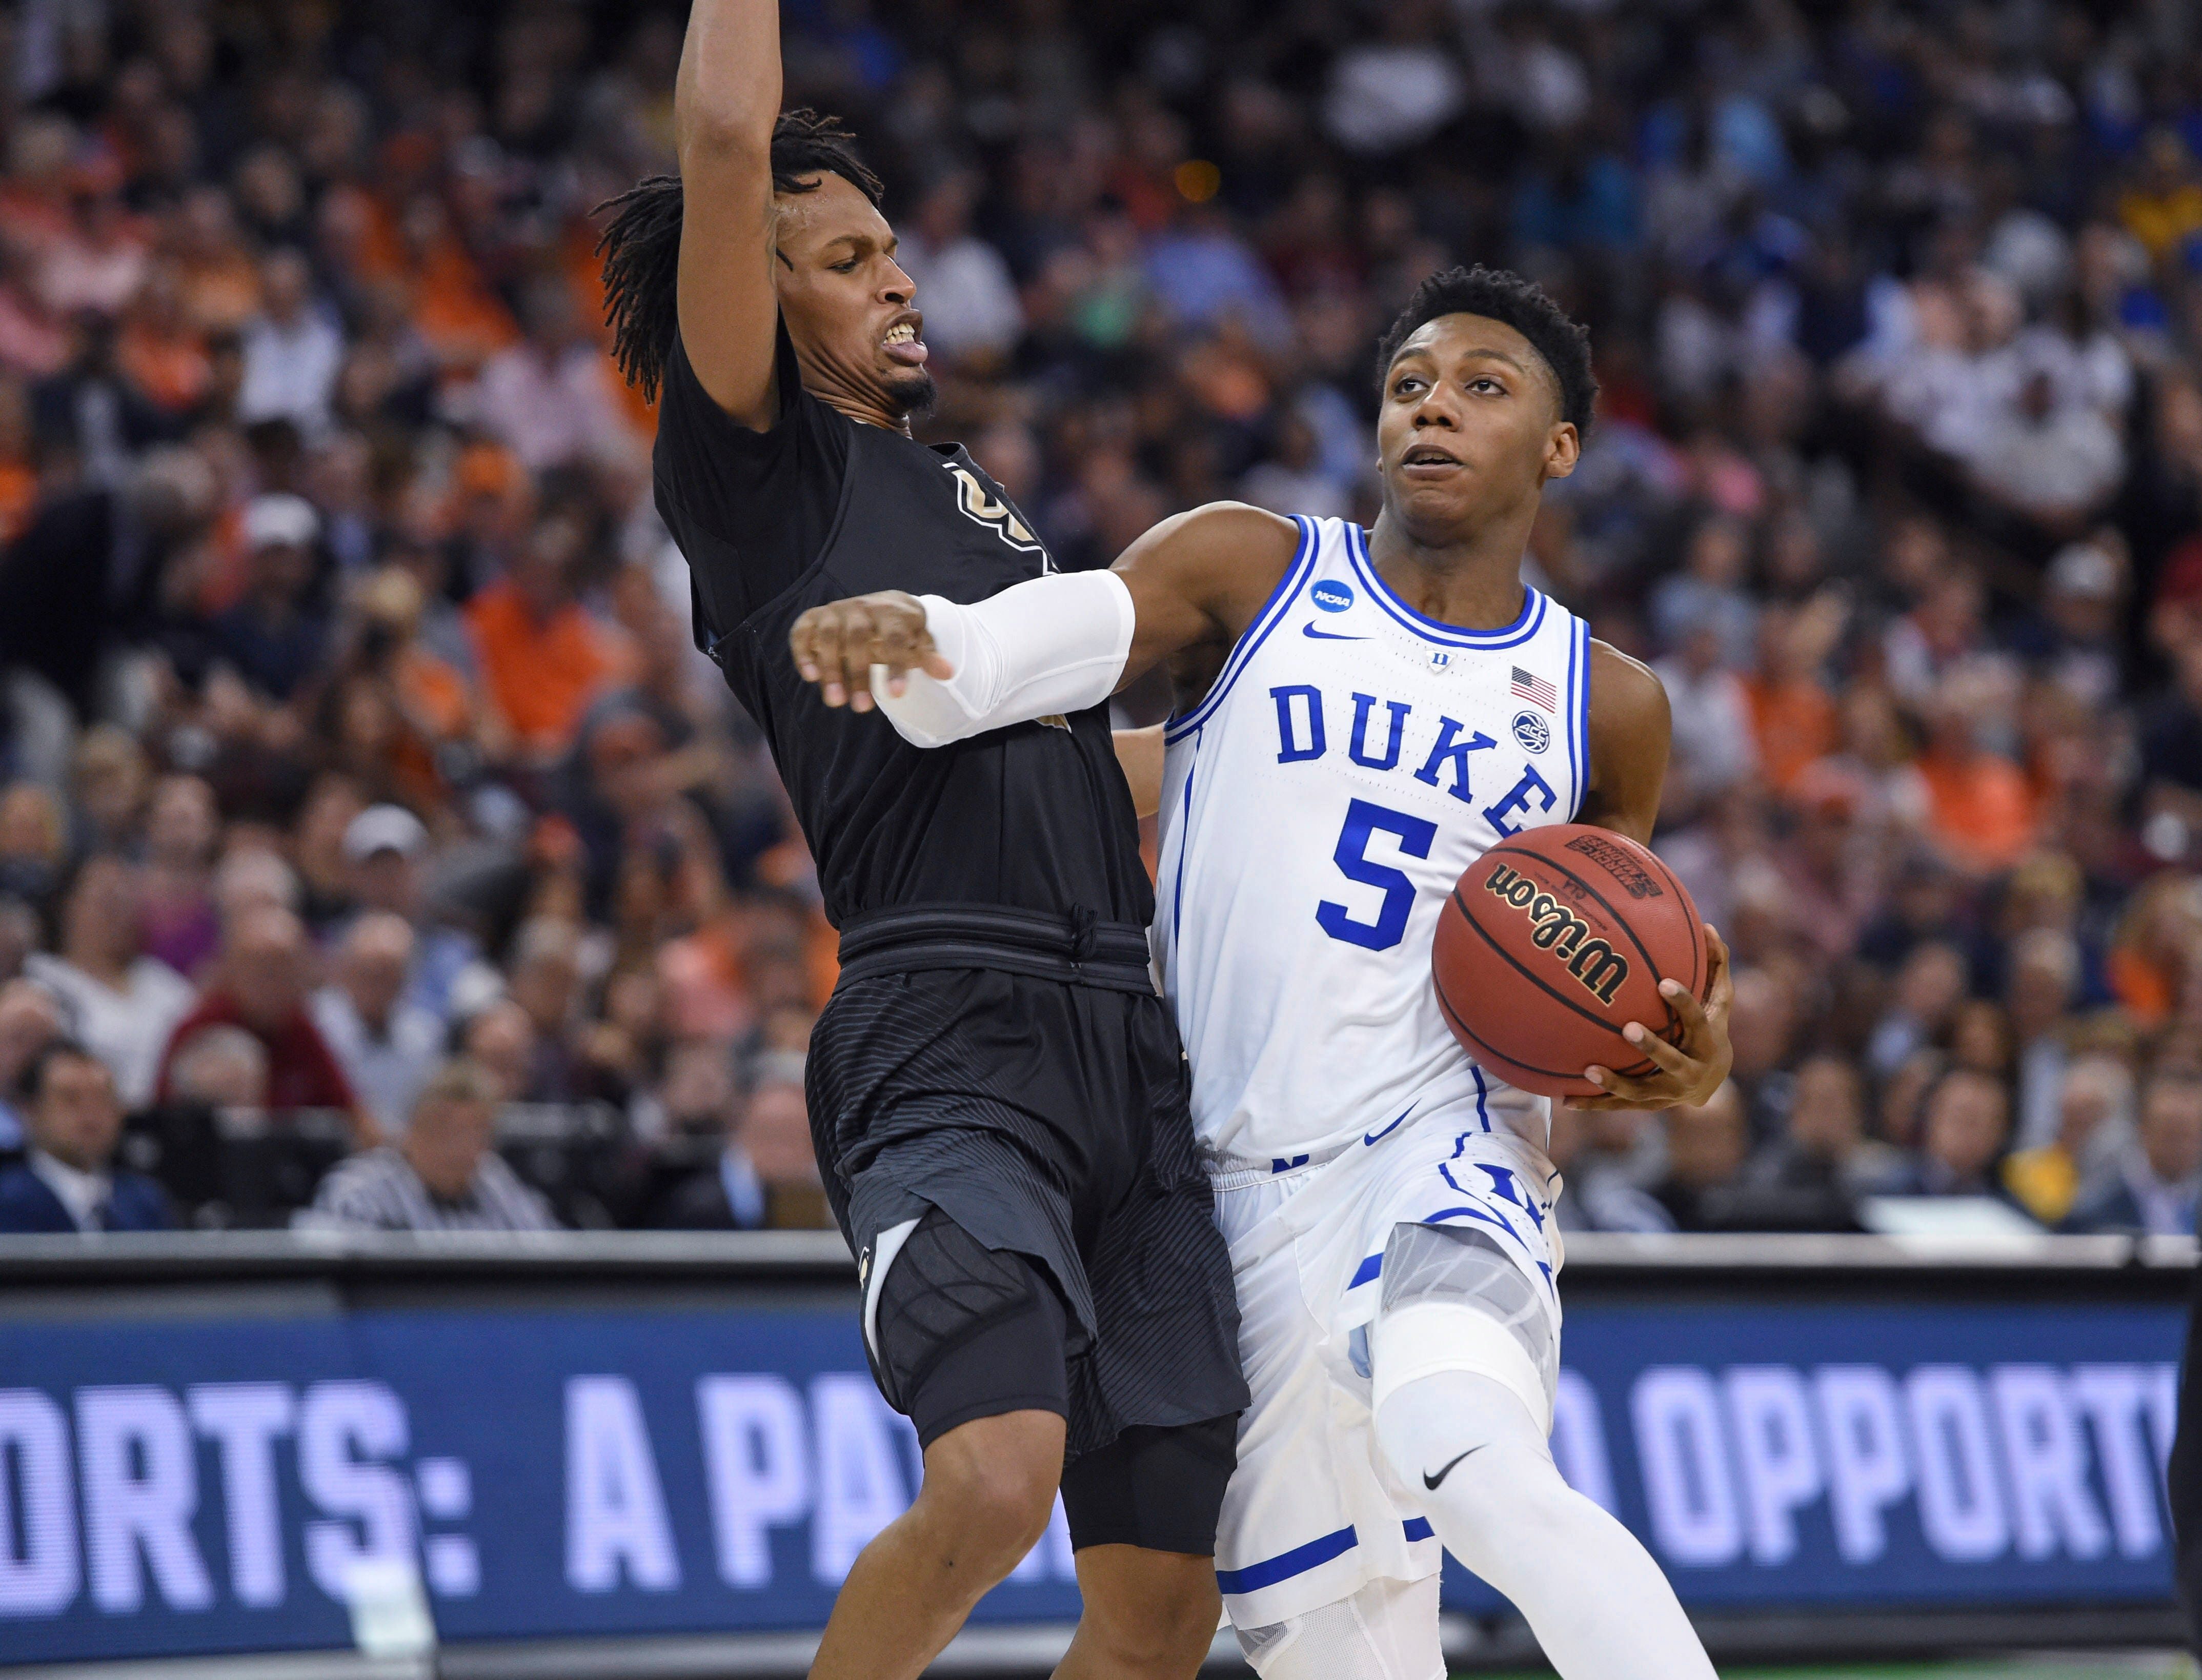 3. New York Knicks: RJ Barrett, wing, Duke. Another iteration of the draft produces the same result for the Knicks, who still could consider trading down, but they may have to take Barrett, just for the playmaking ability, which they’ve lacked. It’s not a bad consolation prize.